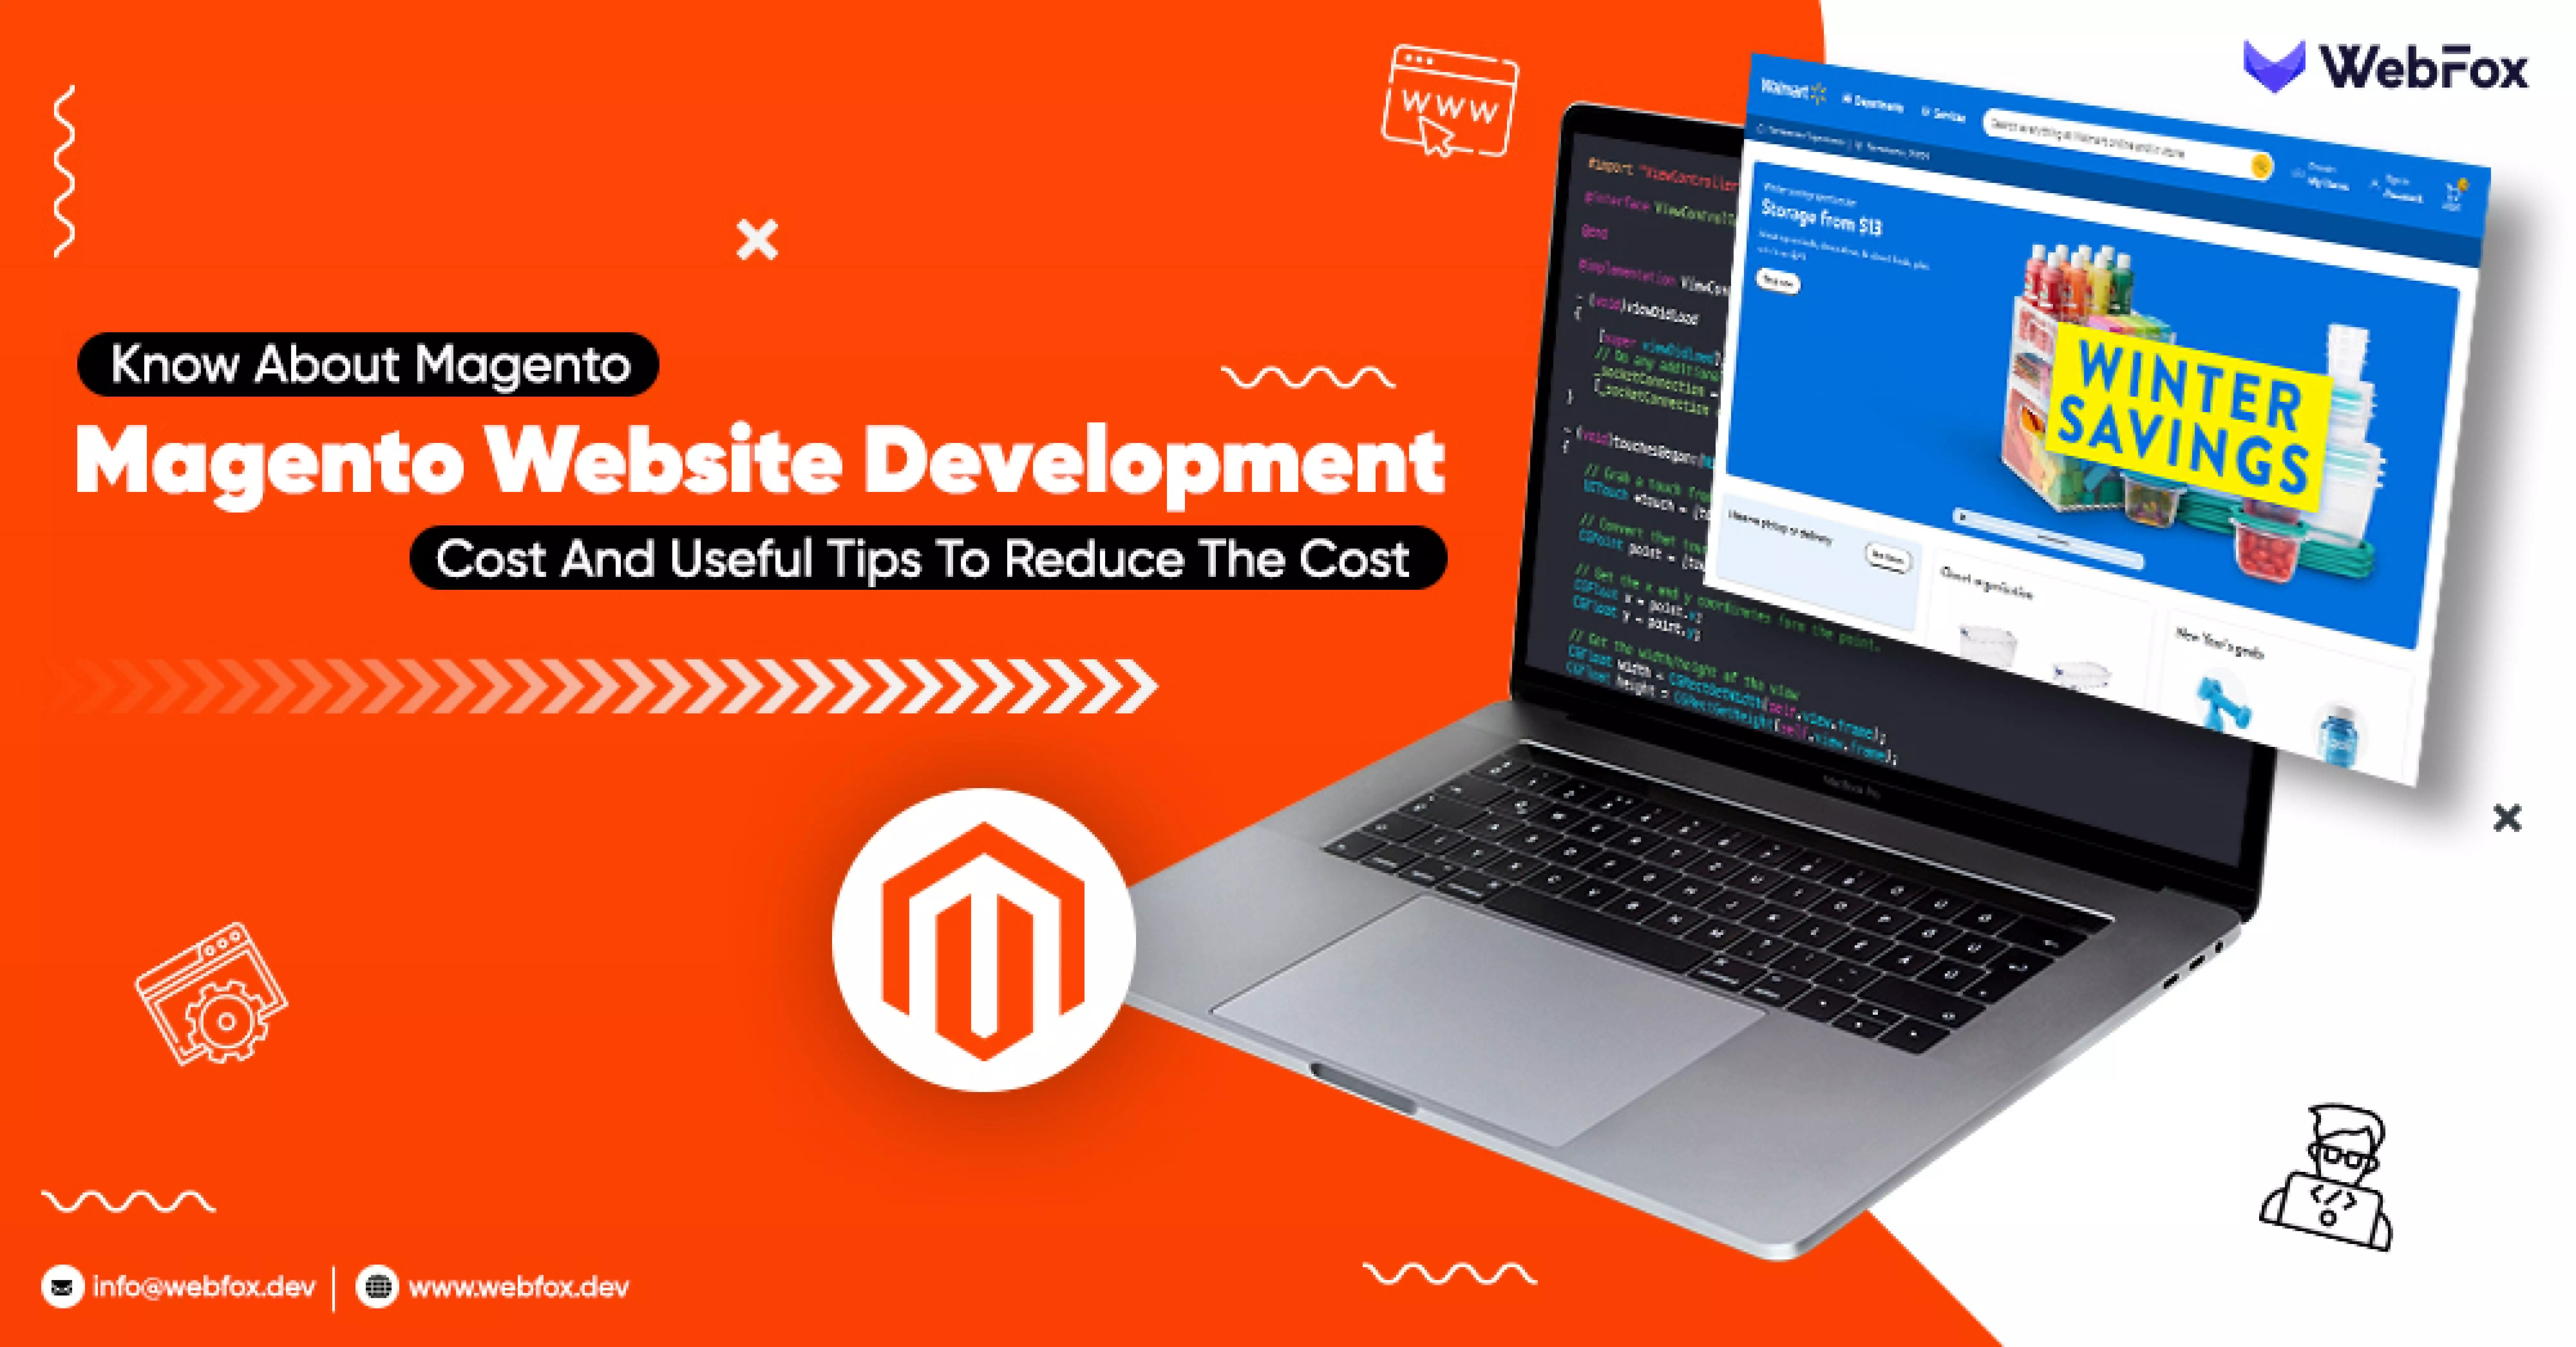 Know About Magento Website Development Cost And Useful Tips To Reduce The Cost